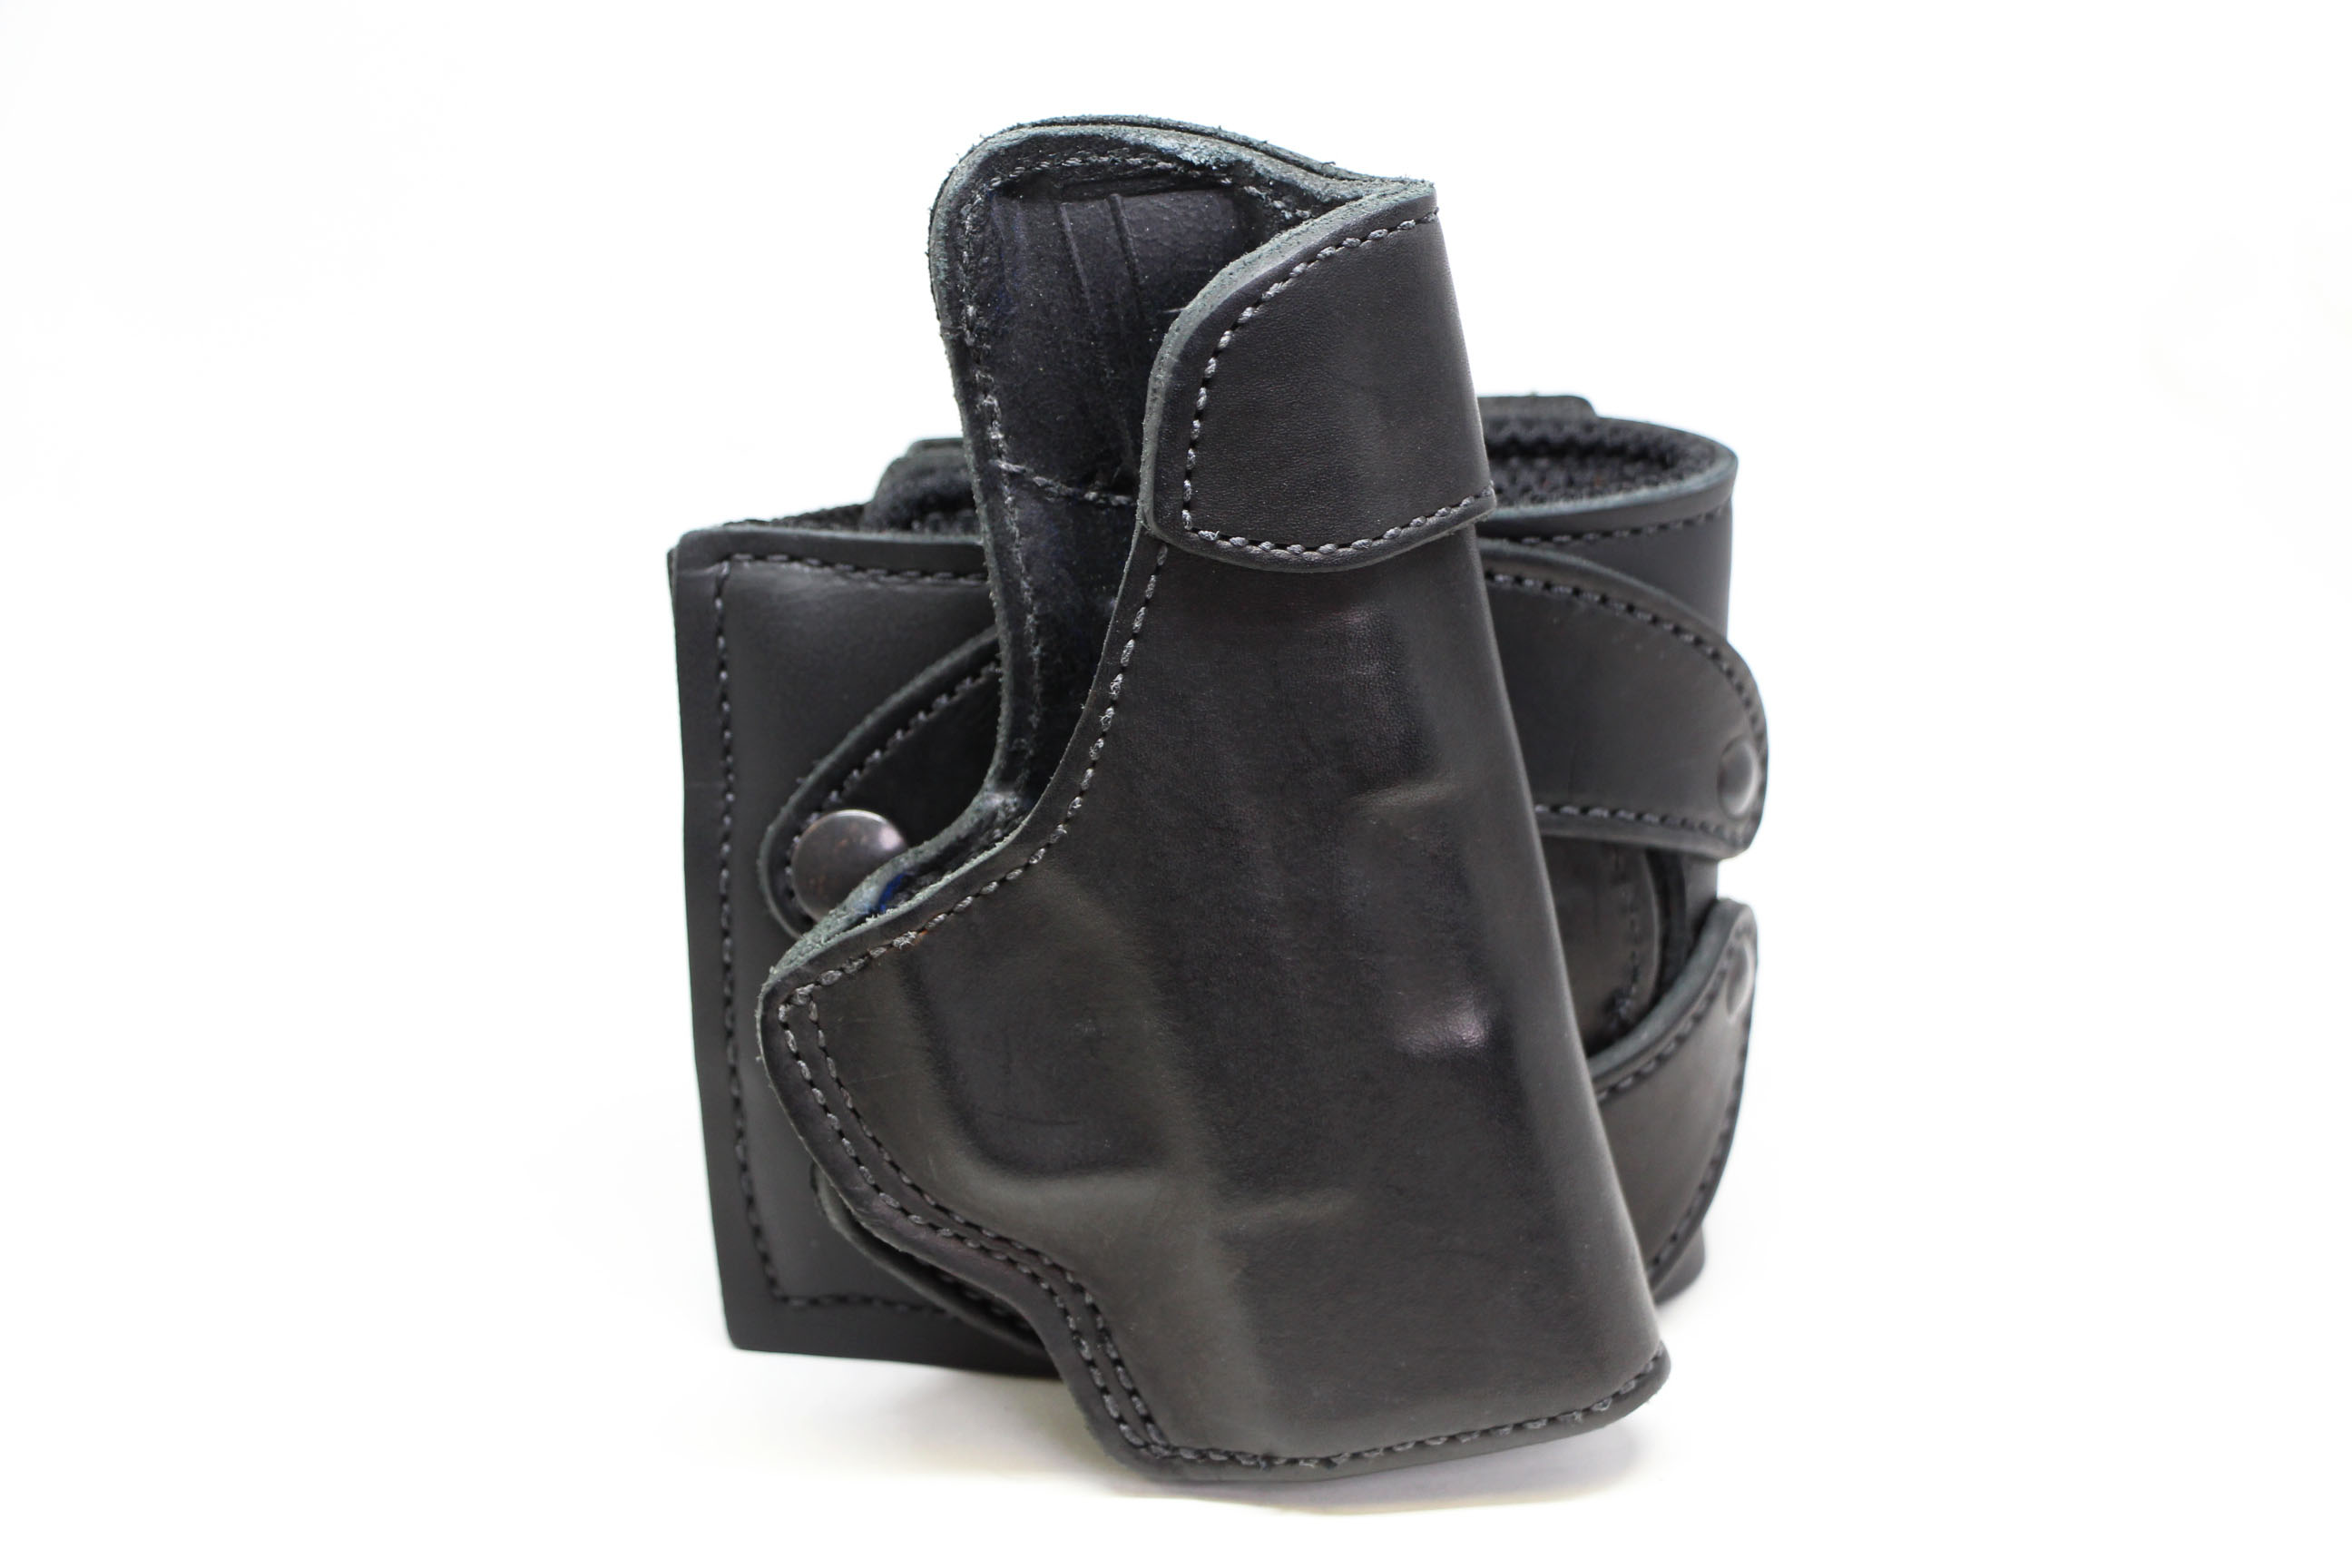 Concealed Carry Ankle Holster for Glock 43 With Laser 